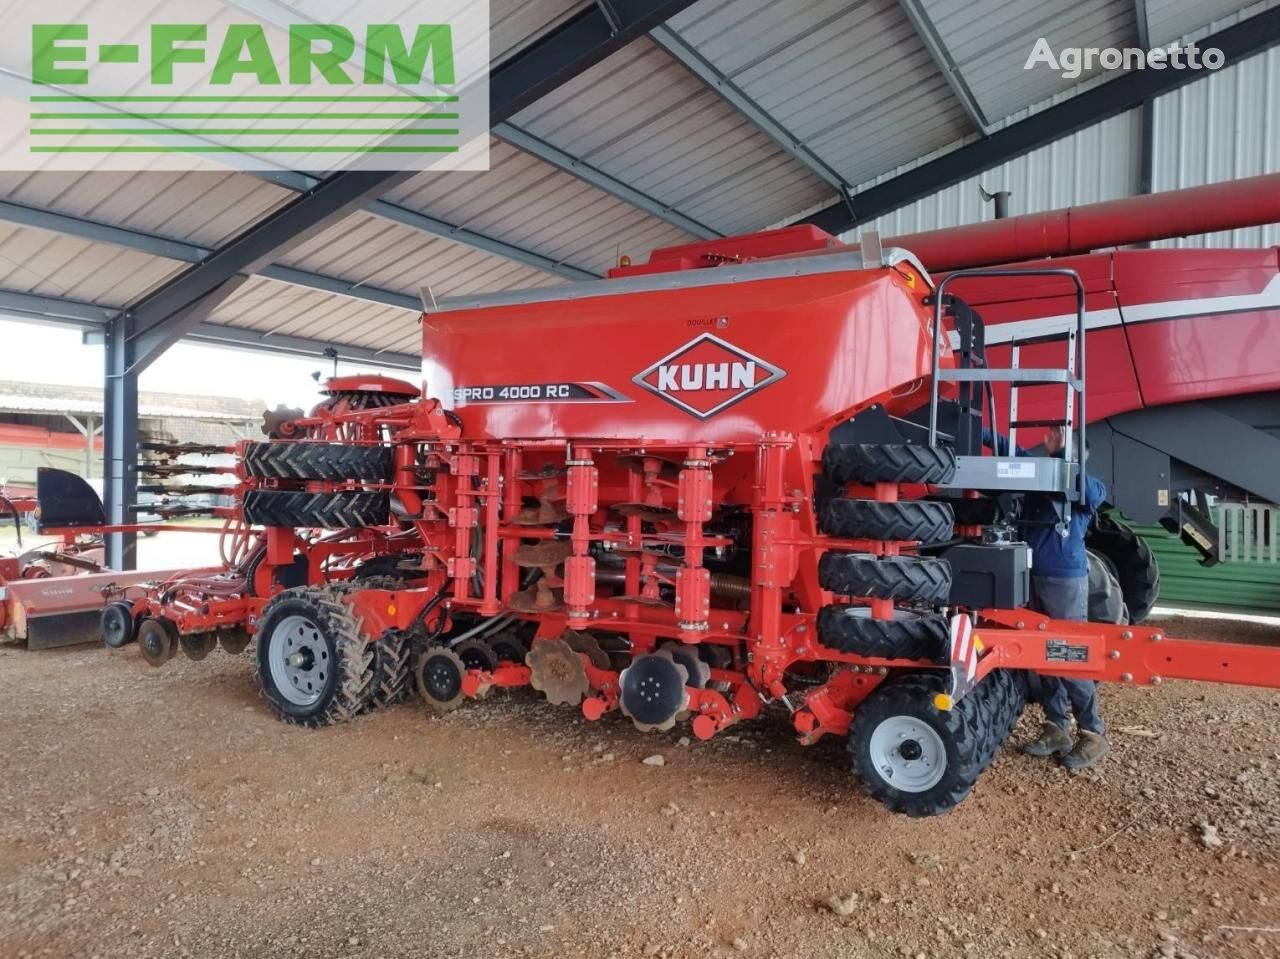 espro 4000 pneumatic seed drill